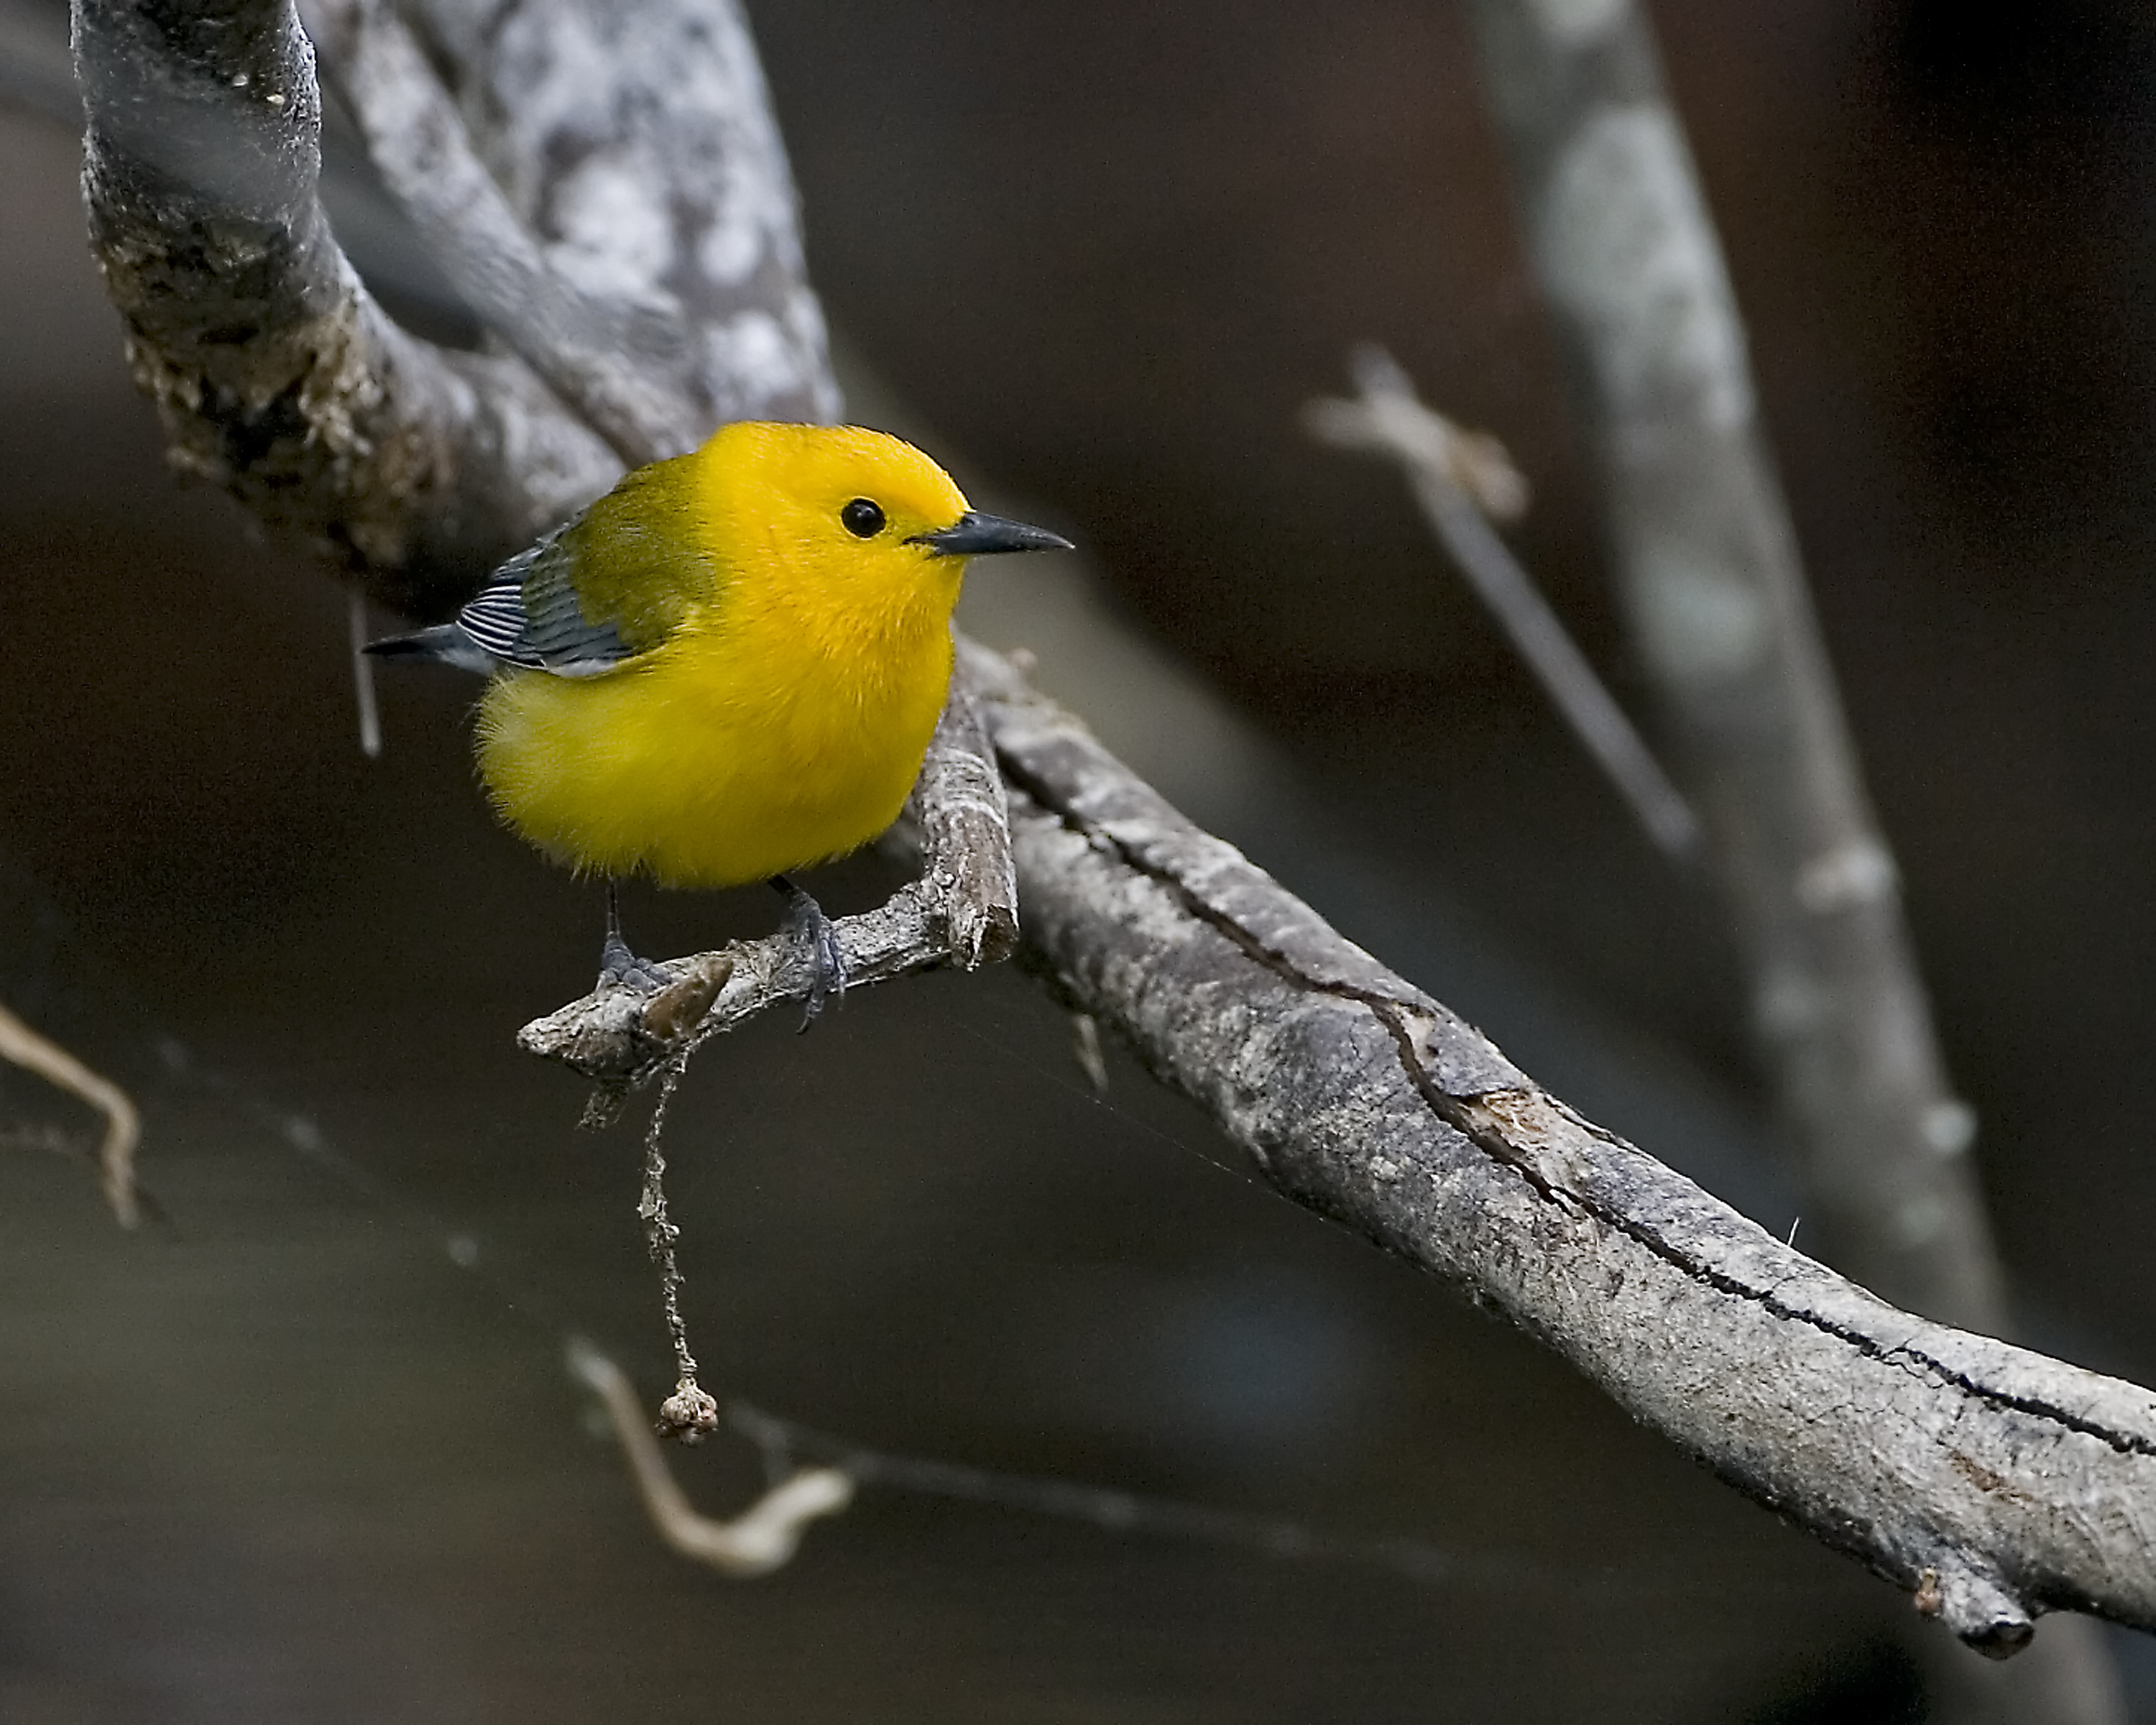 Prothonotary Warbler in Summerville, South Carolina.